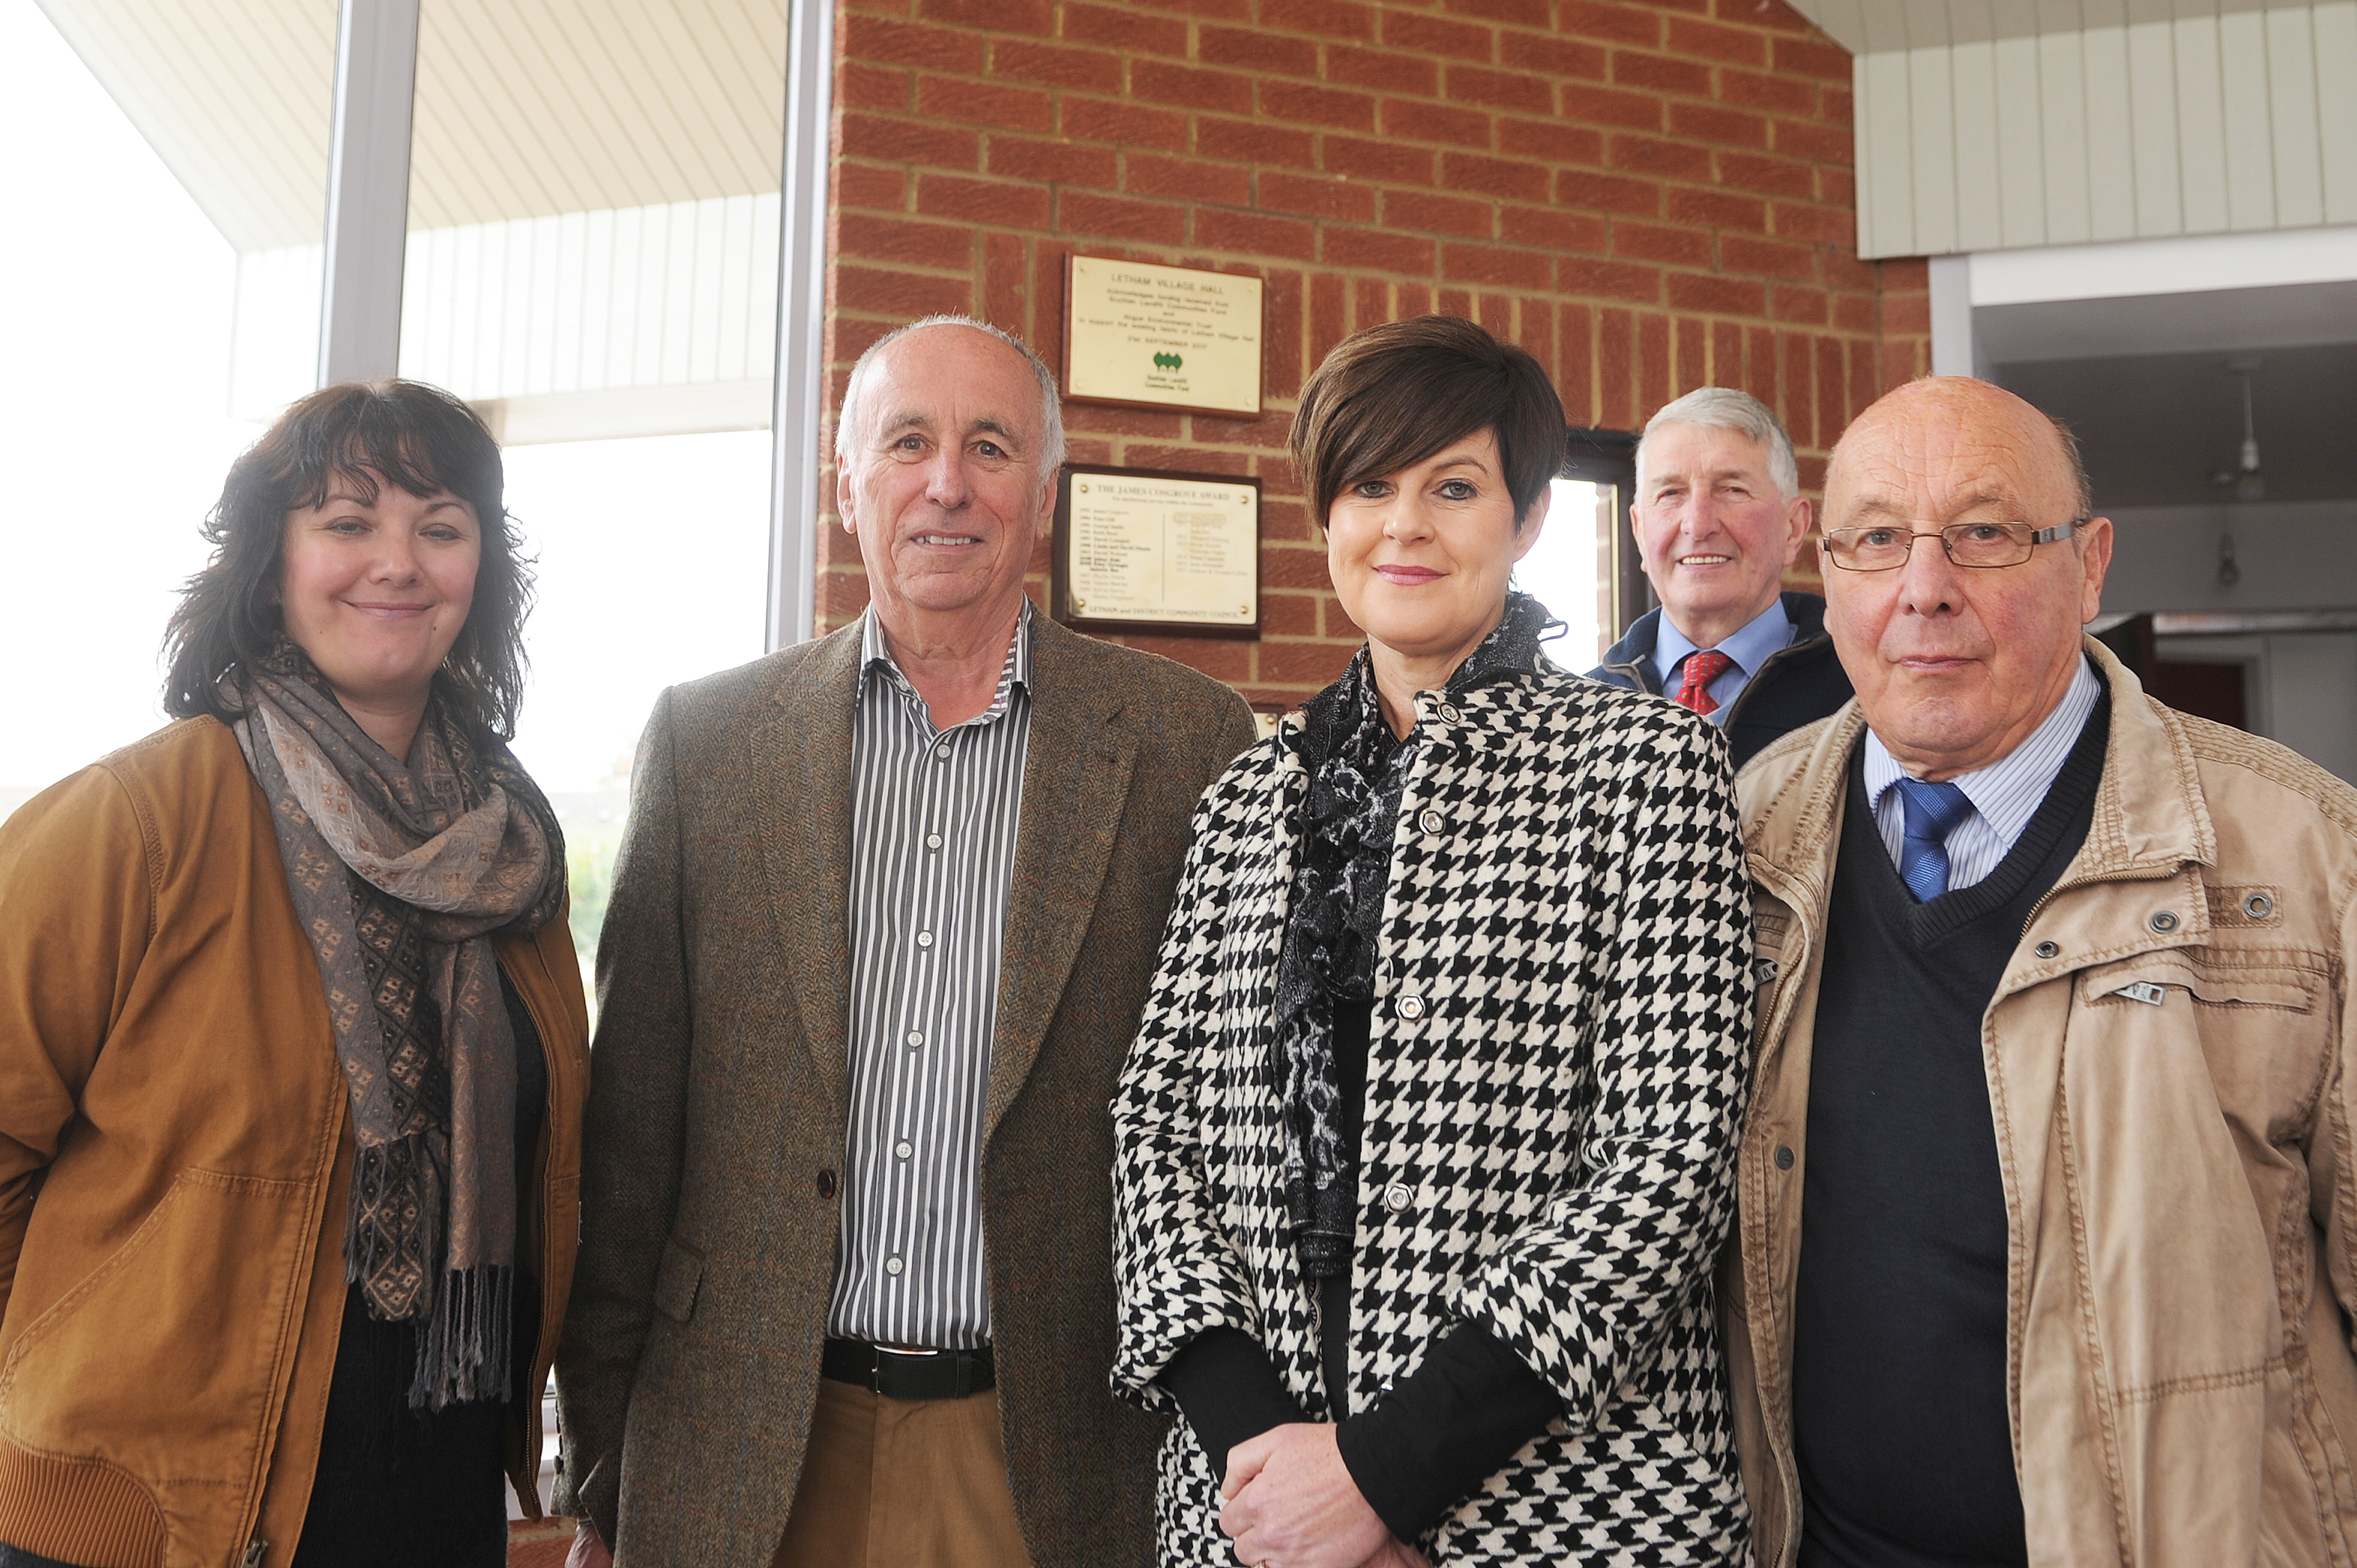 l to r - Kelly Ann Dempsey (Director Angus Environmental Trust), Dave Page (Chairman Letham Village Hall Committee), Alison Smith (Director Angus Environmental Trust), Tom McLung (cq) (Village Hall Committee member) and Gordon Mitchell (Trustee)